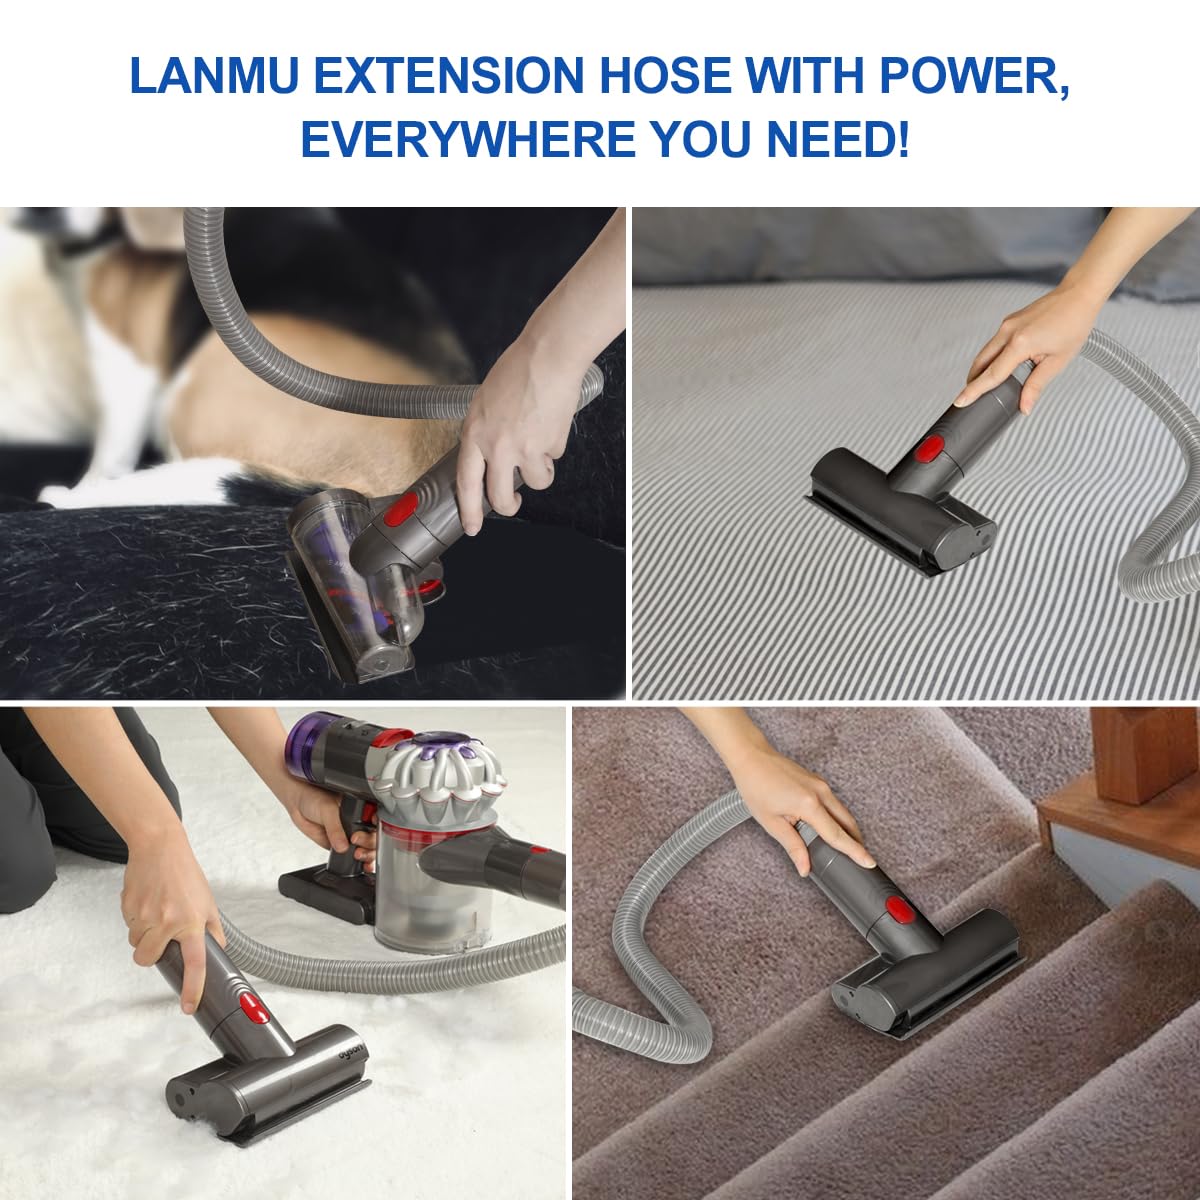 Made of high-quality PVC and metal material. LANMU extension hose with power, everywhere you need!